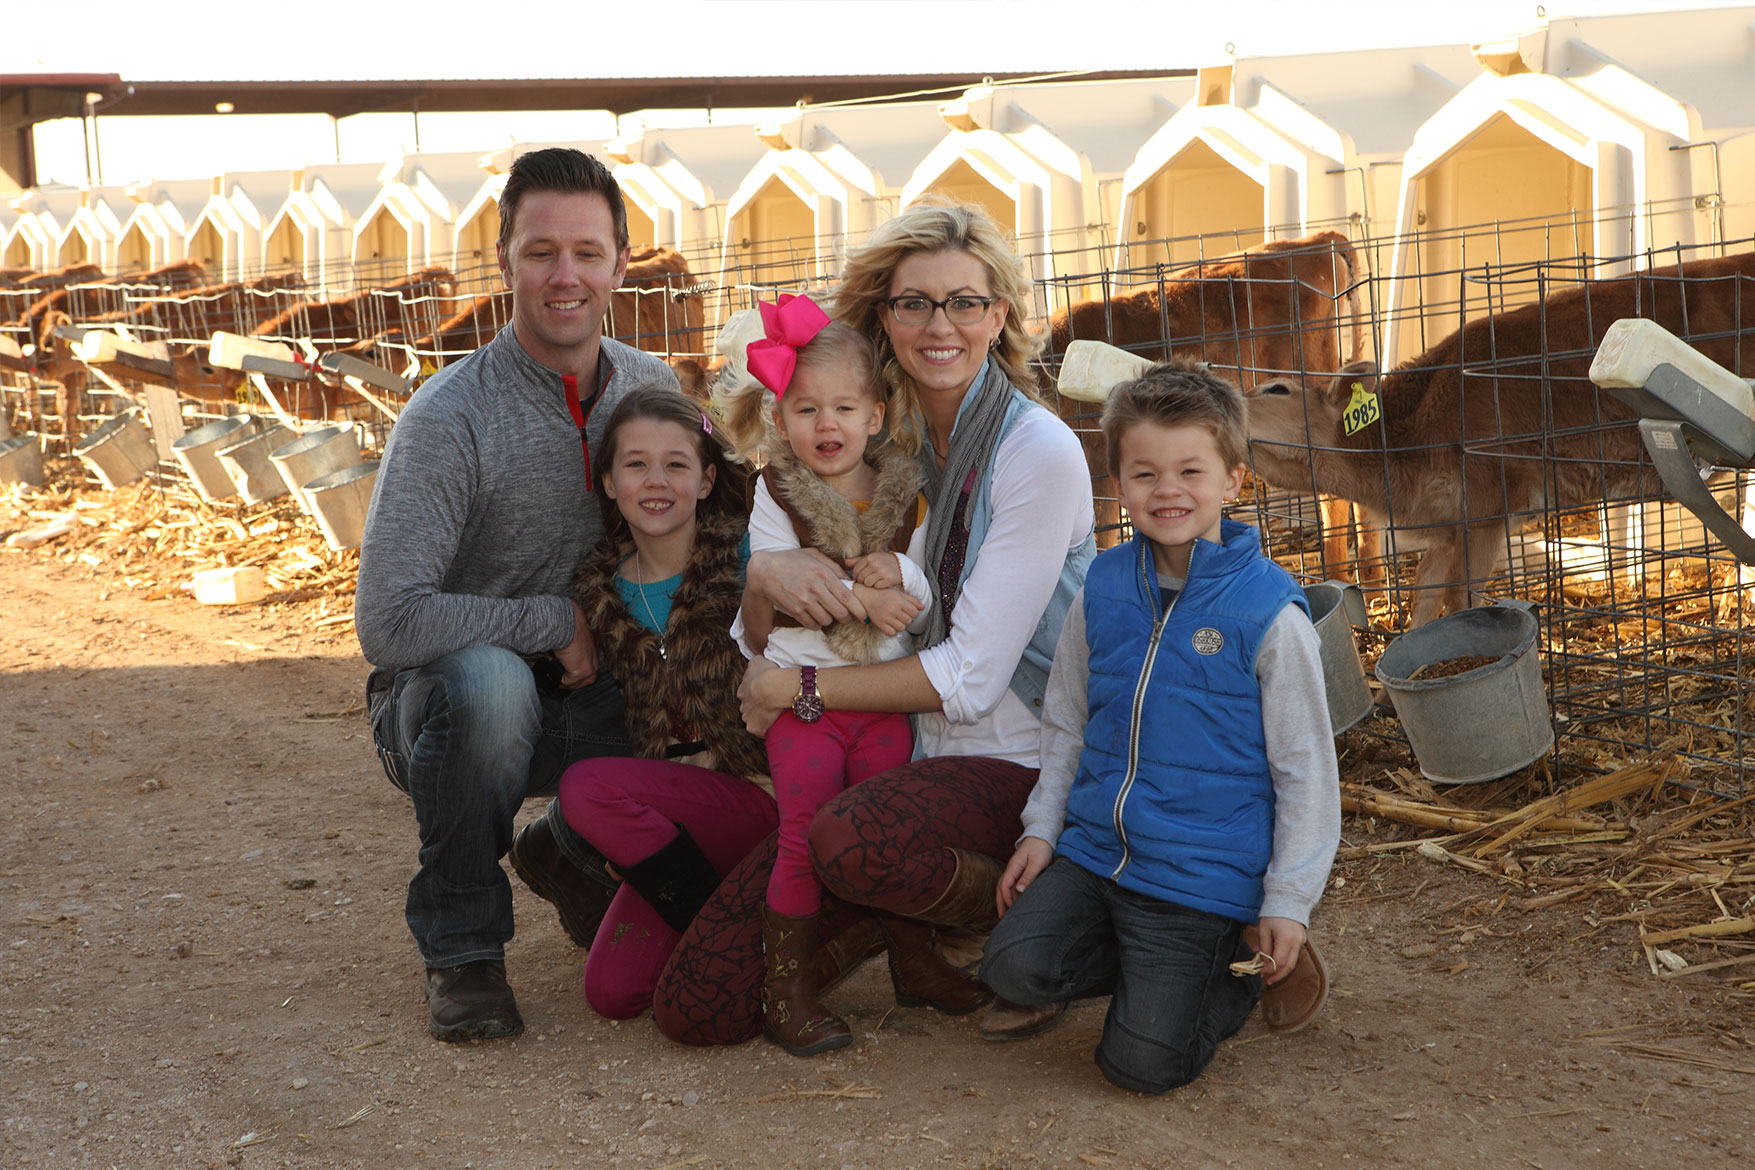 The Ballou family poses in front of their calves.